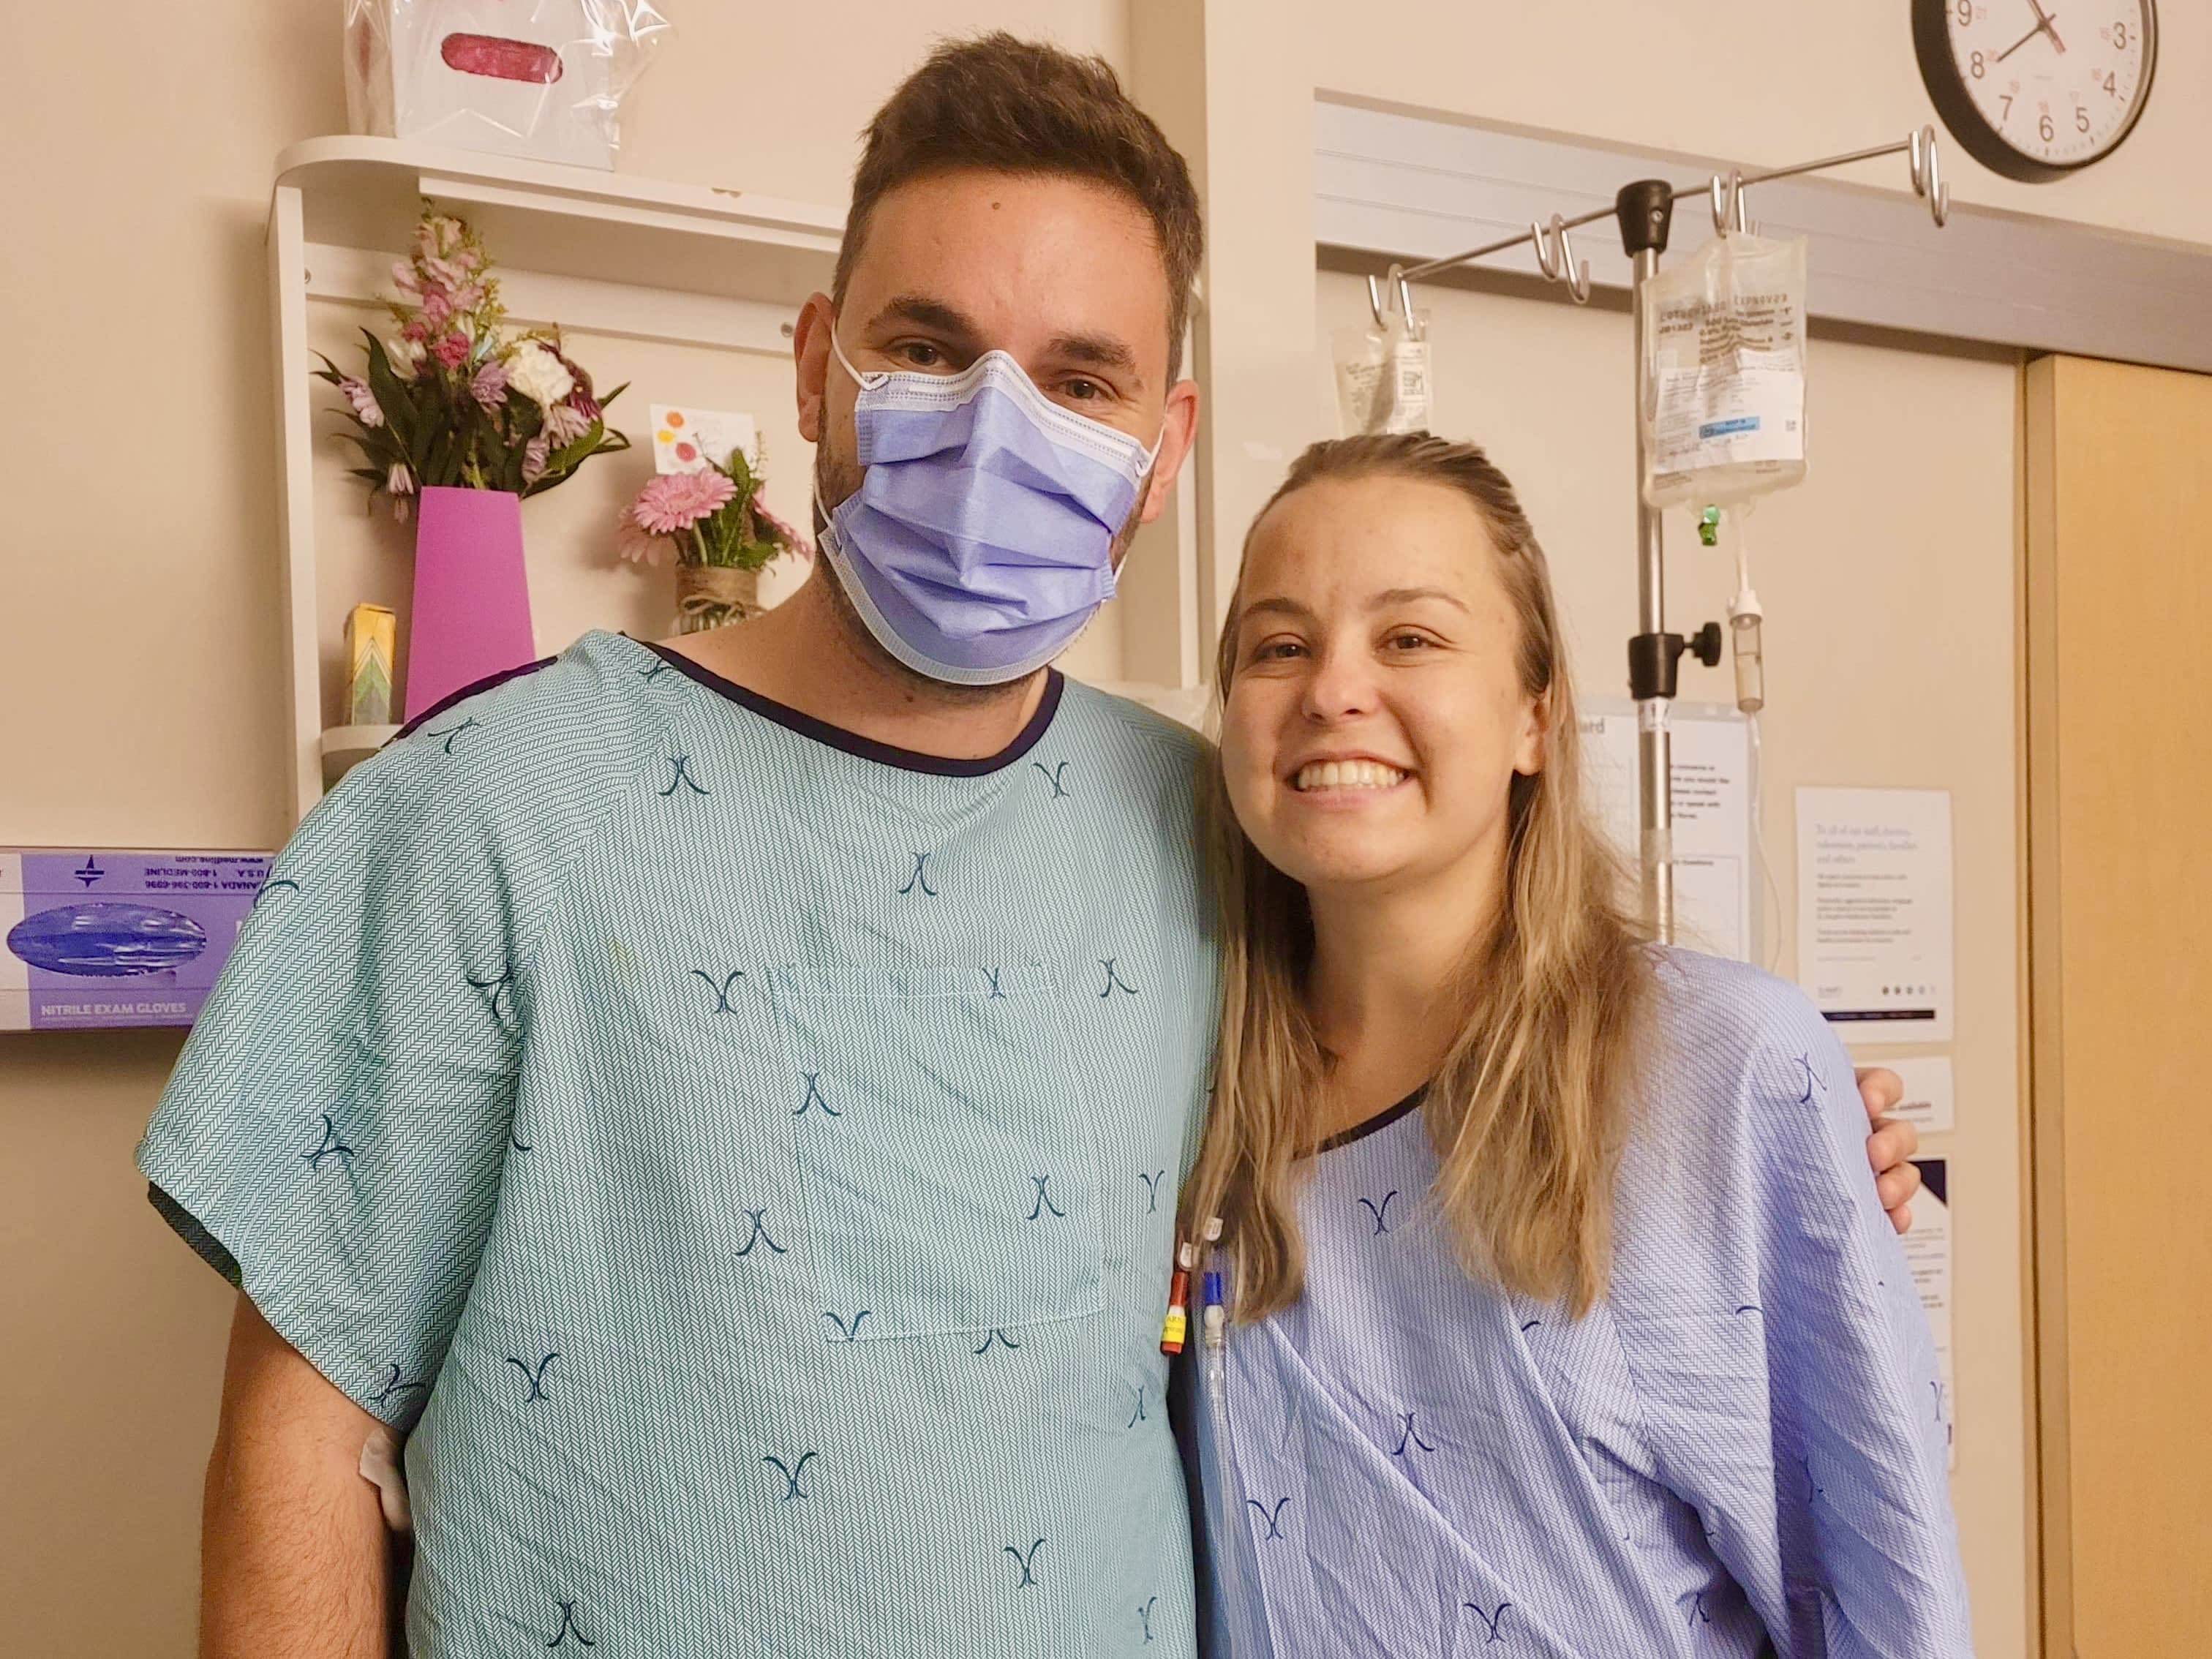 Craig Thompson, left, with his sister-in-law Brittany Smith, right, before their organ transplant surgeries. Thompson donated one of his kidneys to Smith.